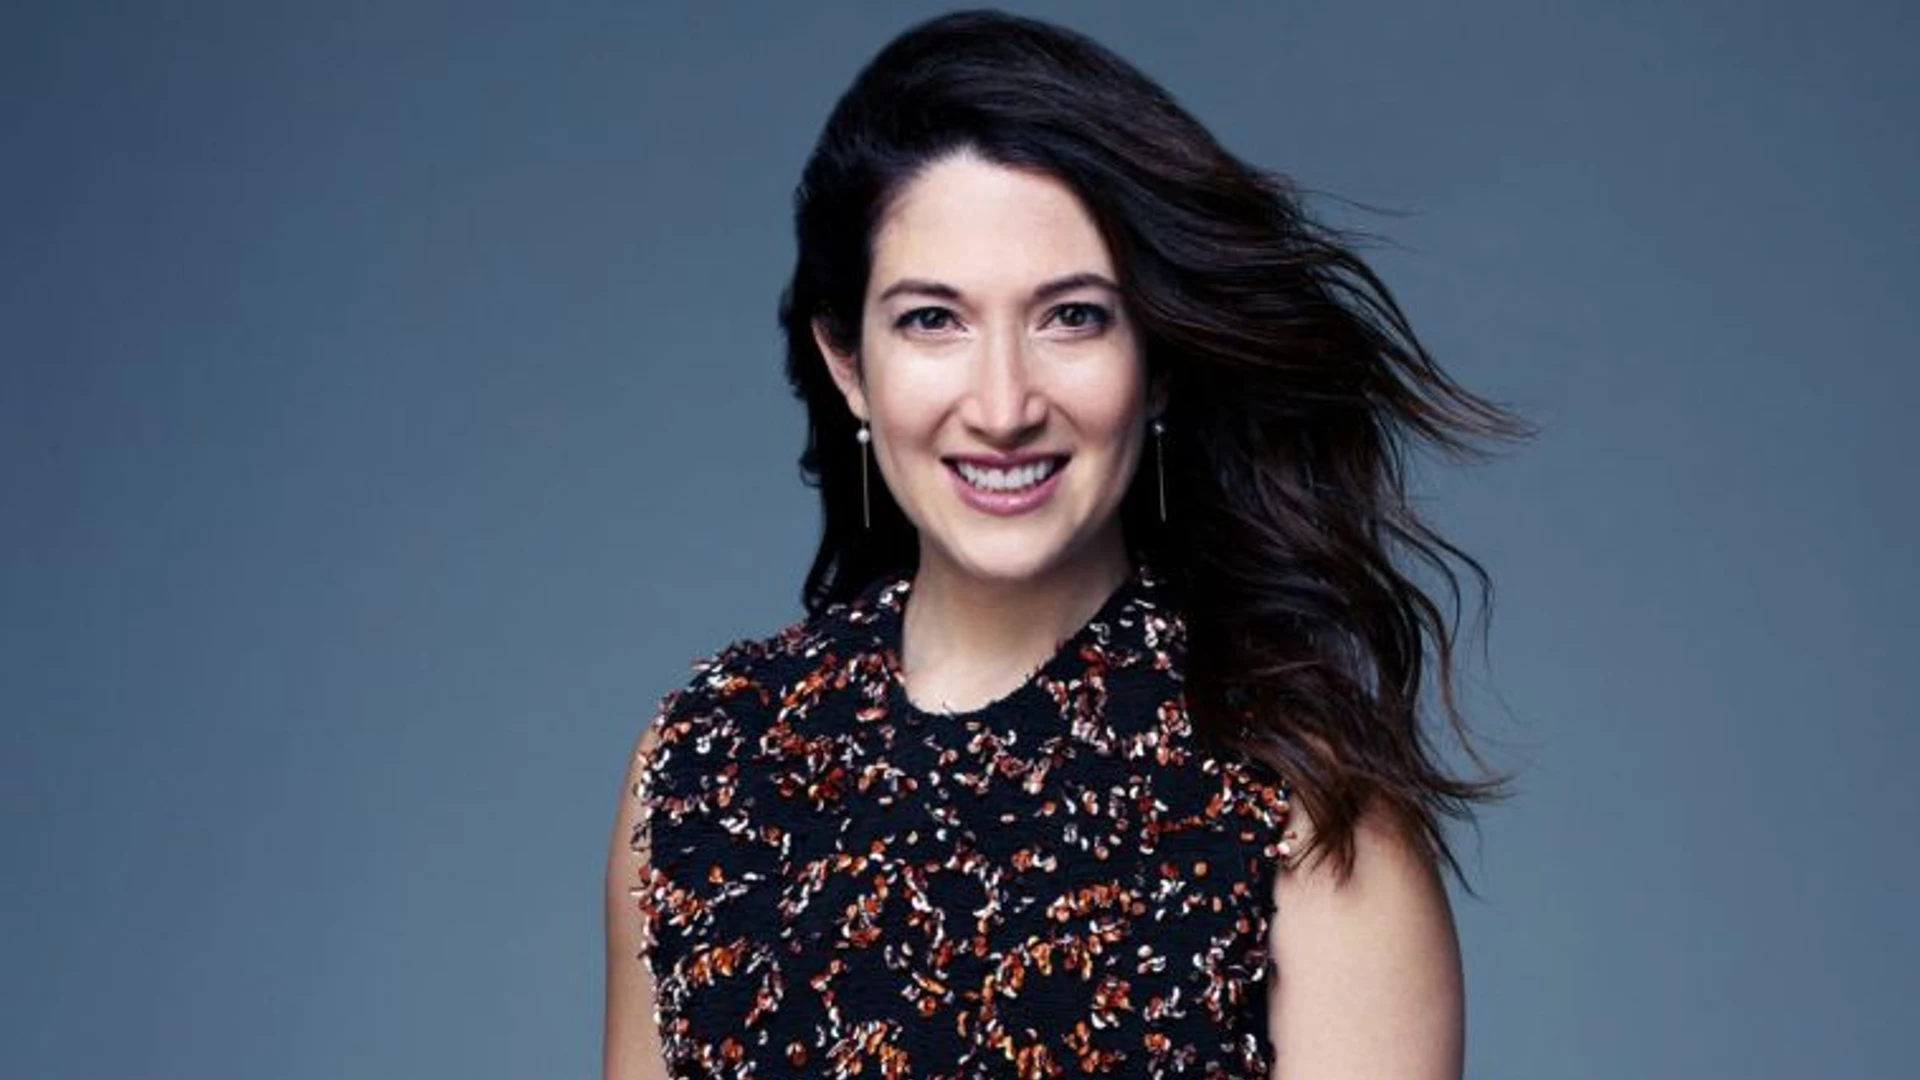 Why Does Randi Zuckerberg Make Cringe Music Videos About Cryptocurrency?